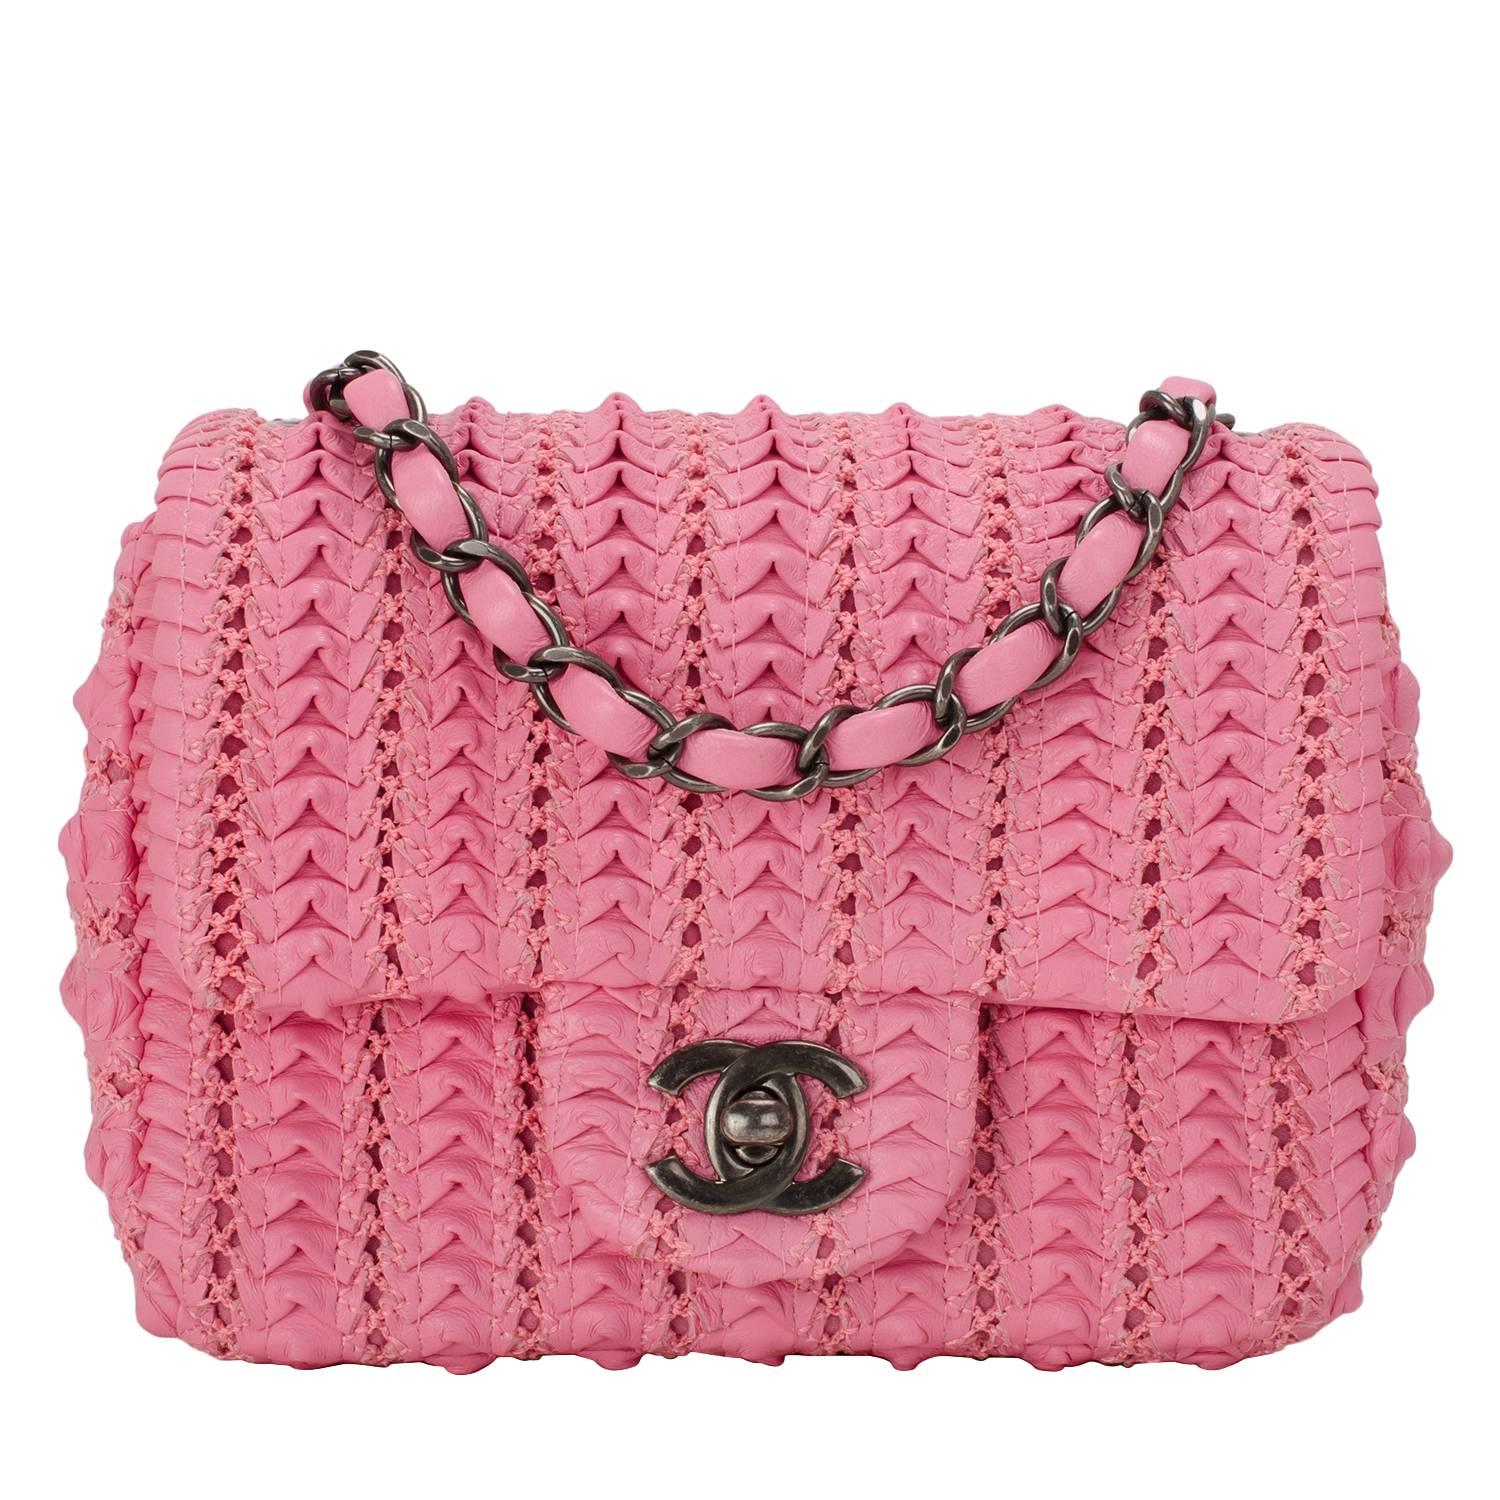 Chanel Pink Embroidered Lambskin Square Mini Flap Bag NEW For Sale